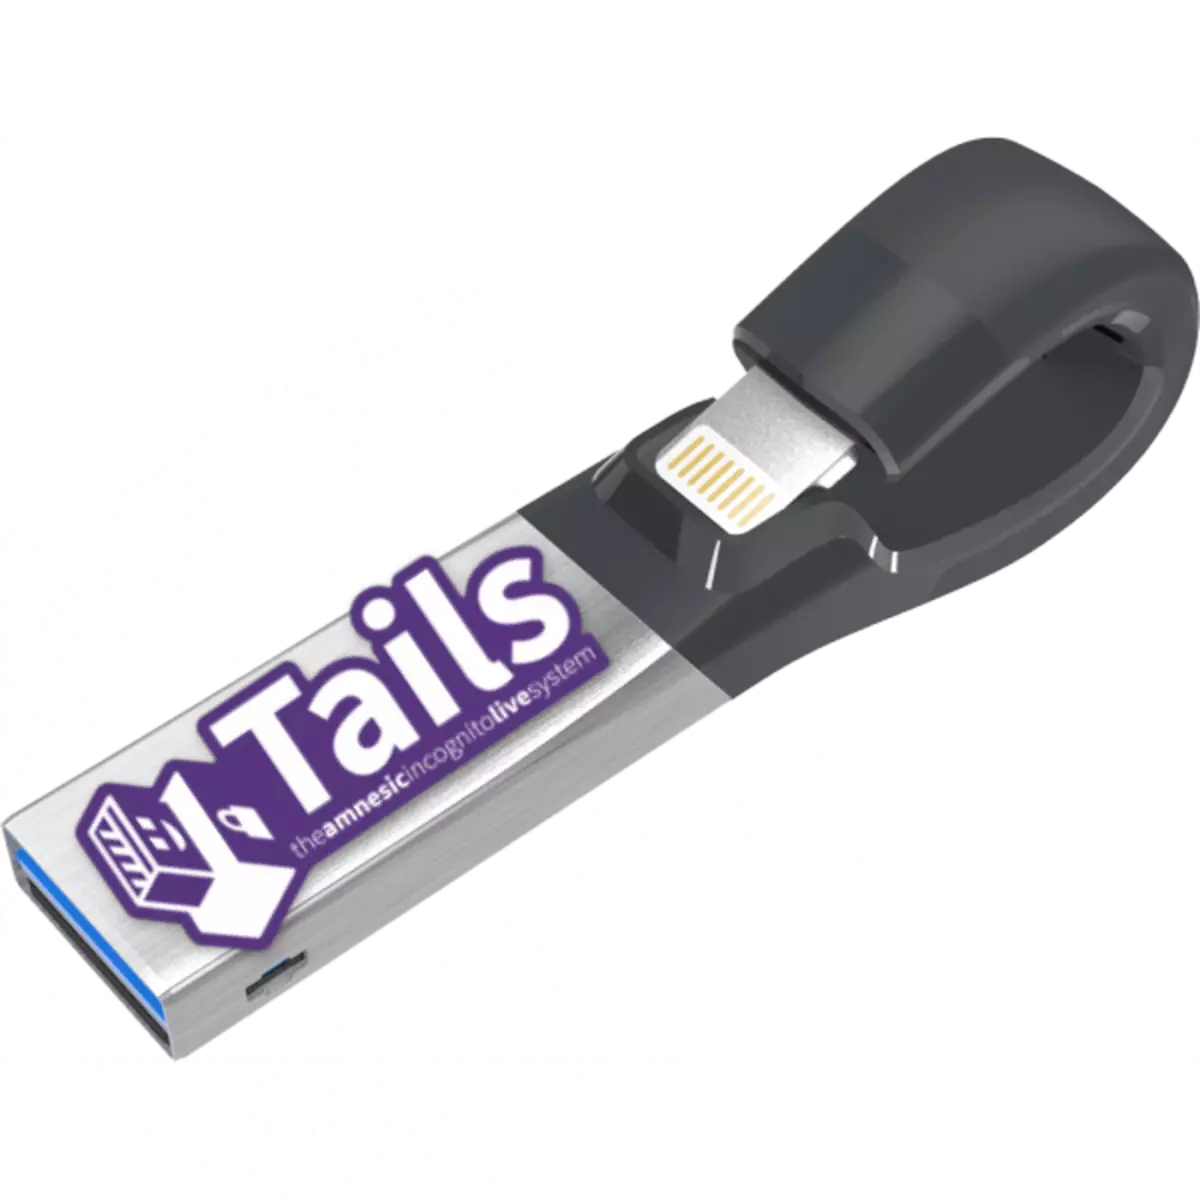 how to install tails on a flash drive